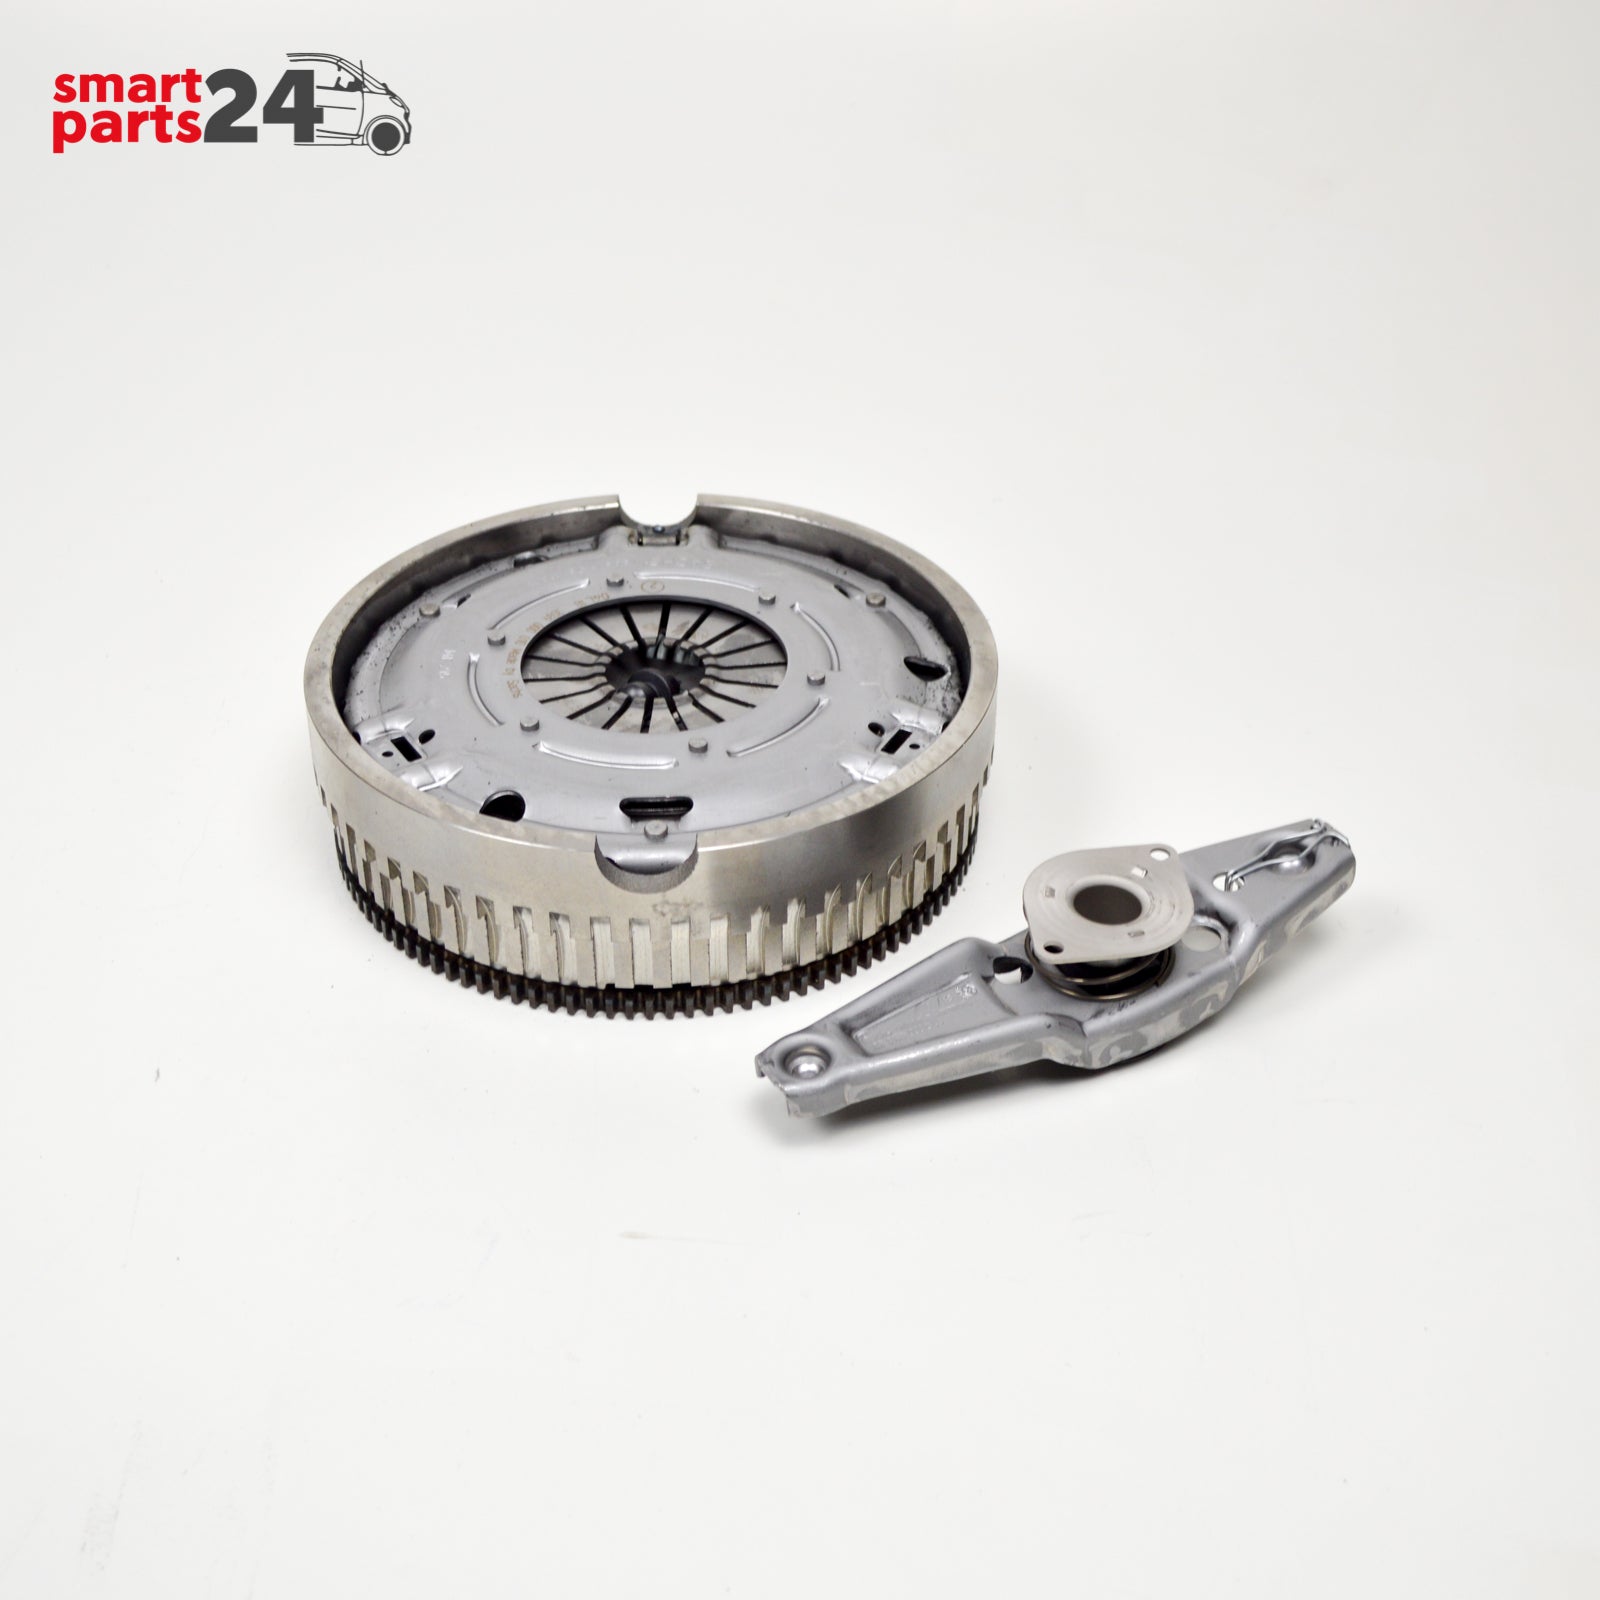 Smart Fortwo 450 CDI Sachs clutch kit with release bearing 3090600003